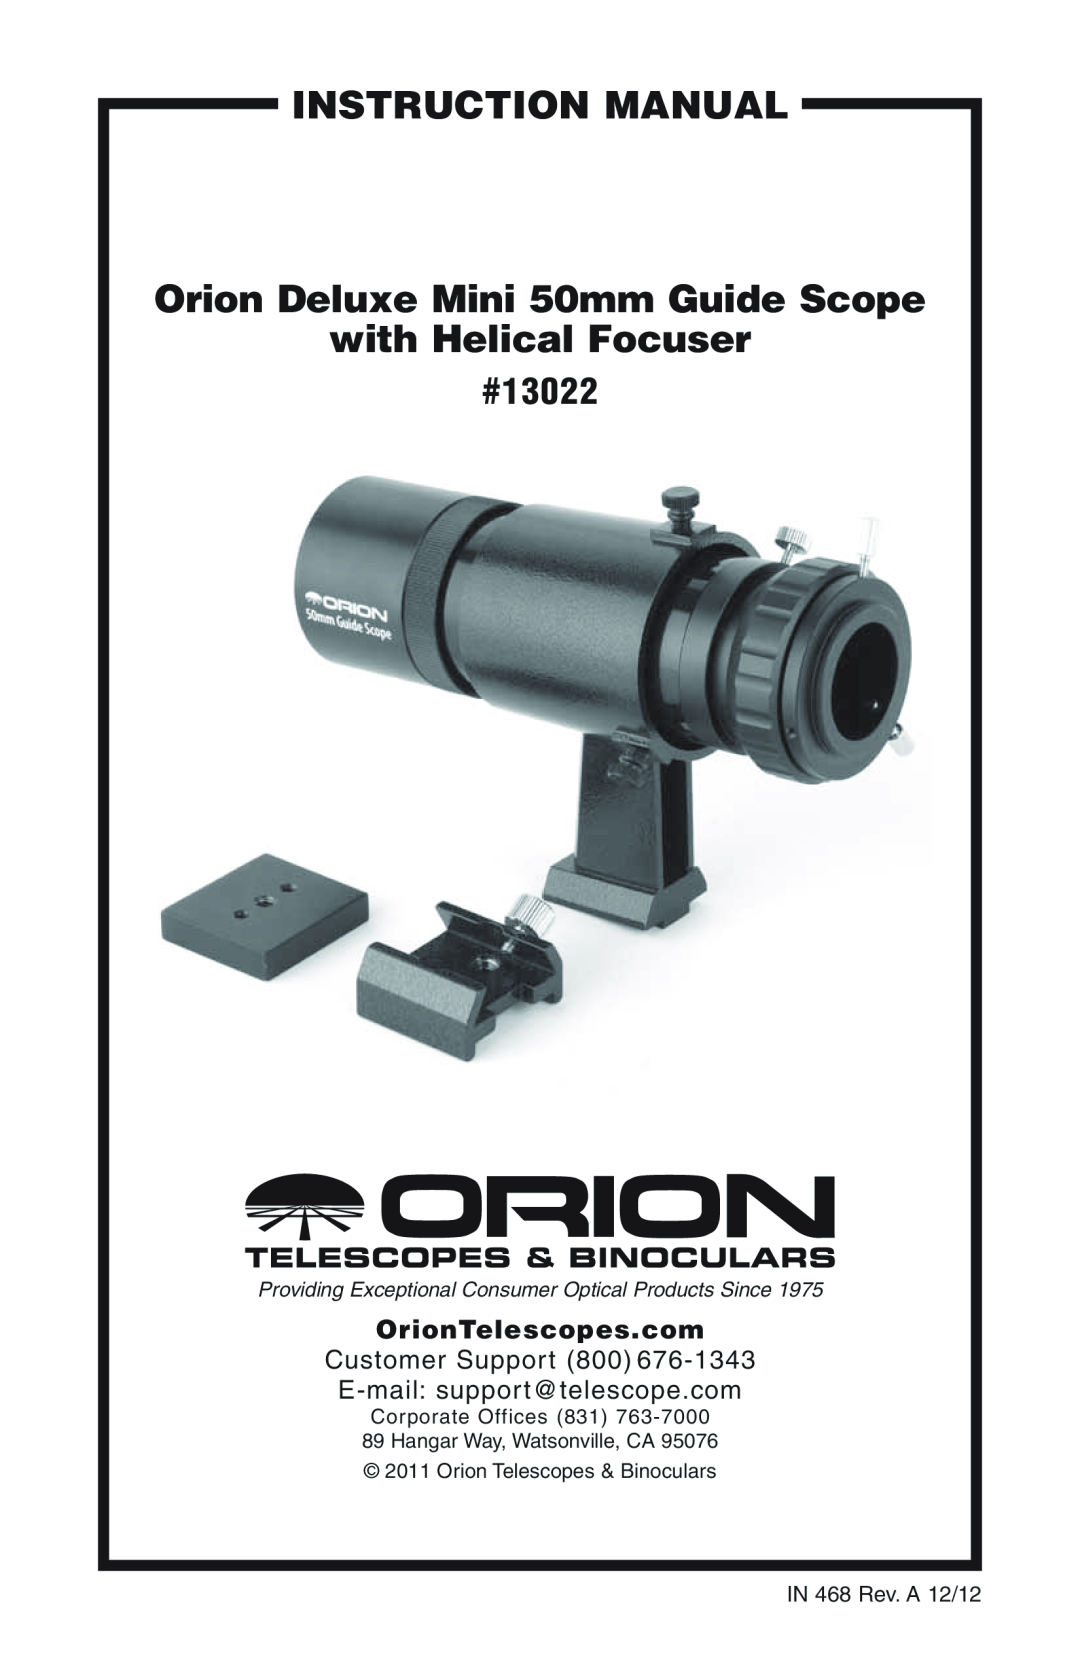 Orion instruction manual Orion Deluxe Mini 50mm Guide Scope, with Helical Focuser, OrionTelescopes.com, #13022 